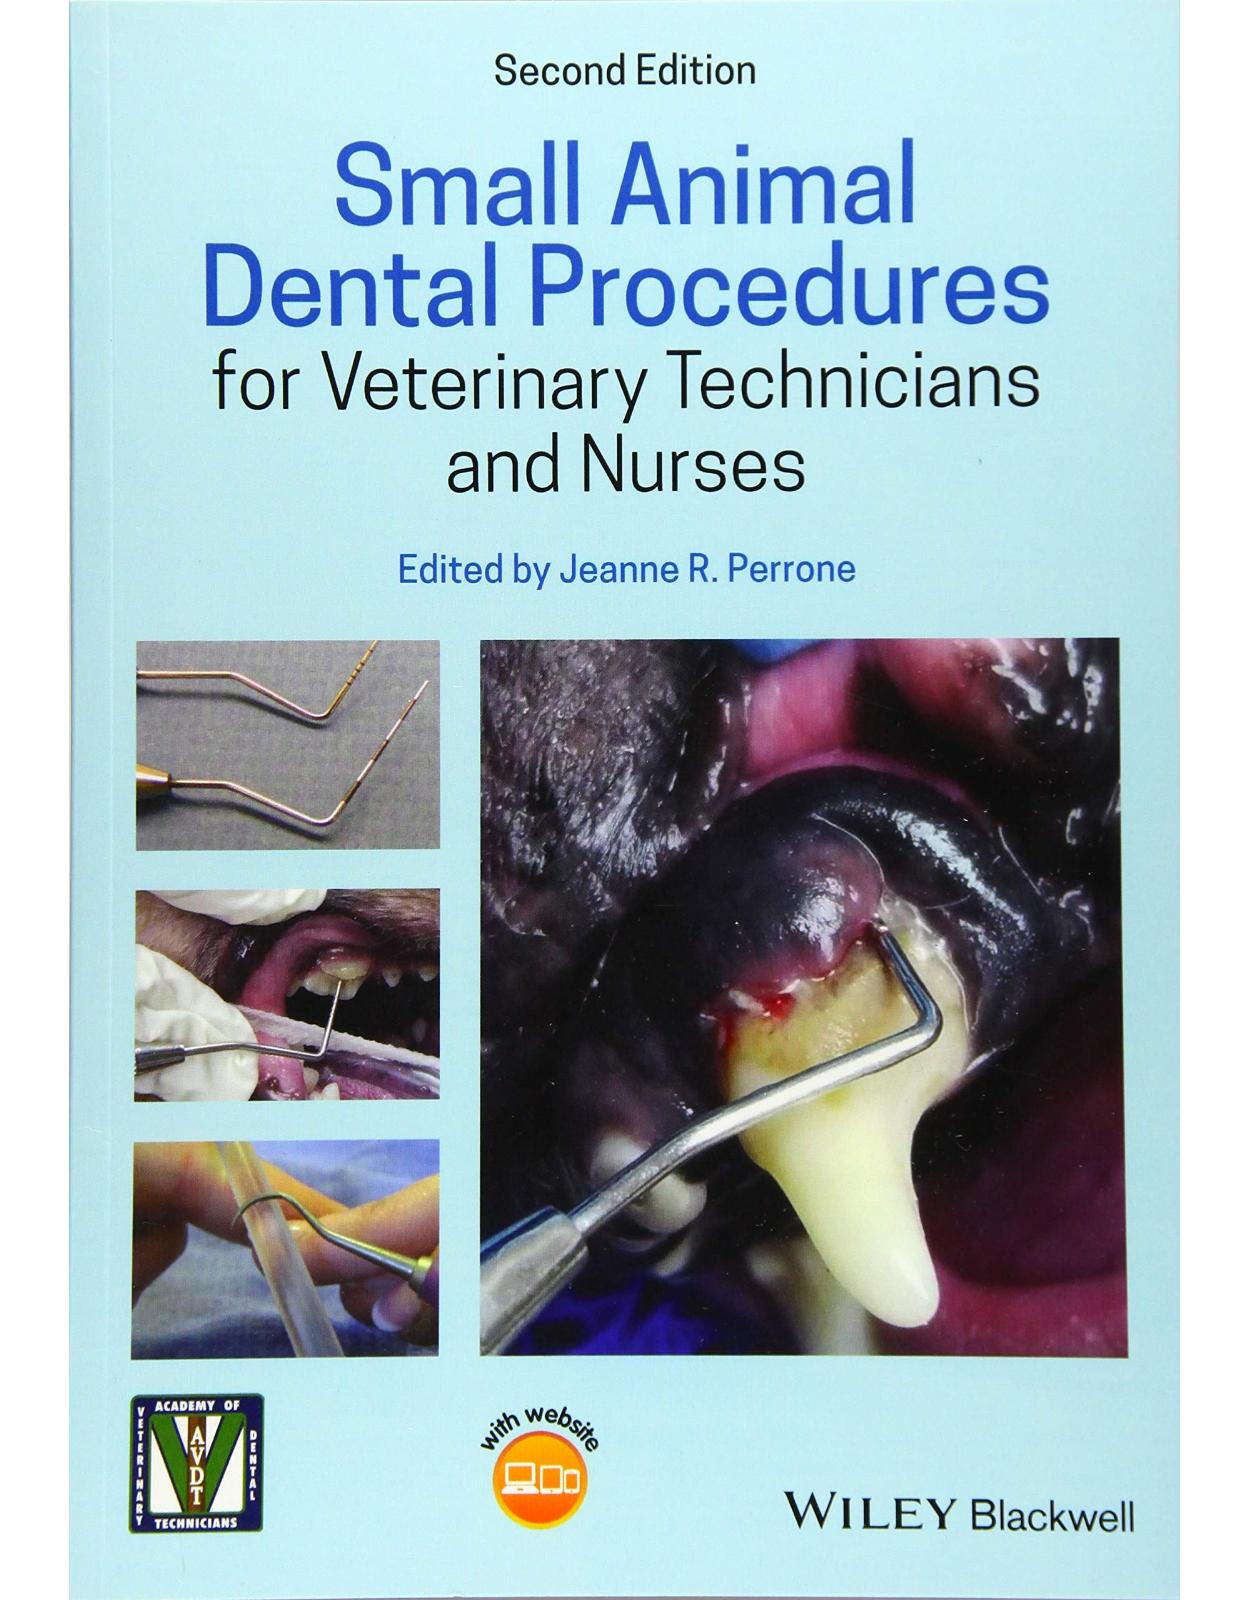 Small Animal Dental Procedures for Veterinary Technicians and Nurses, 2nd Edition